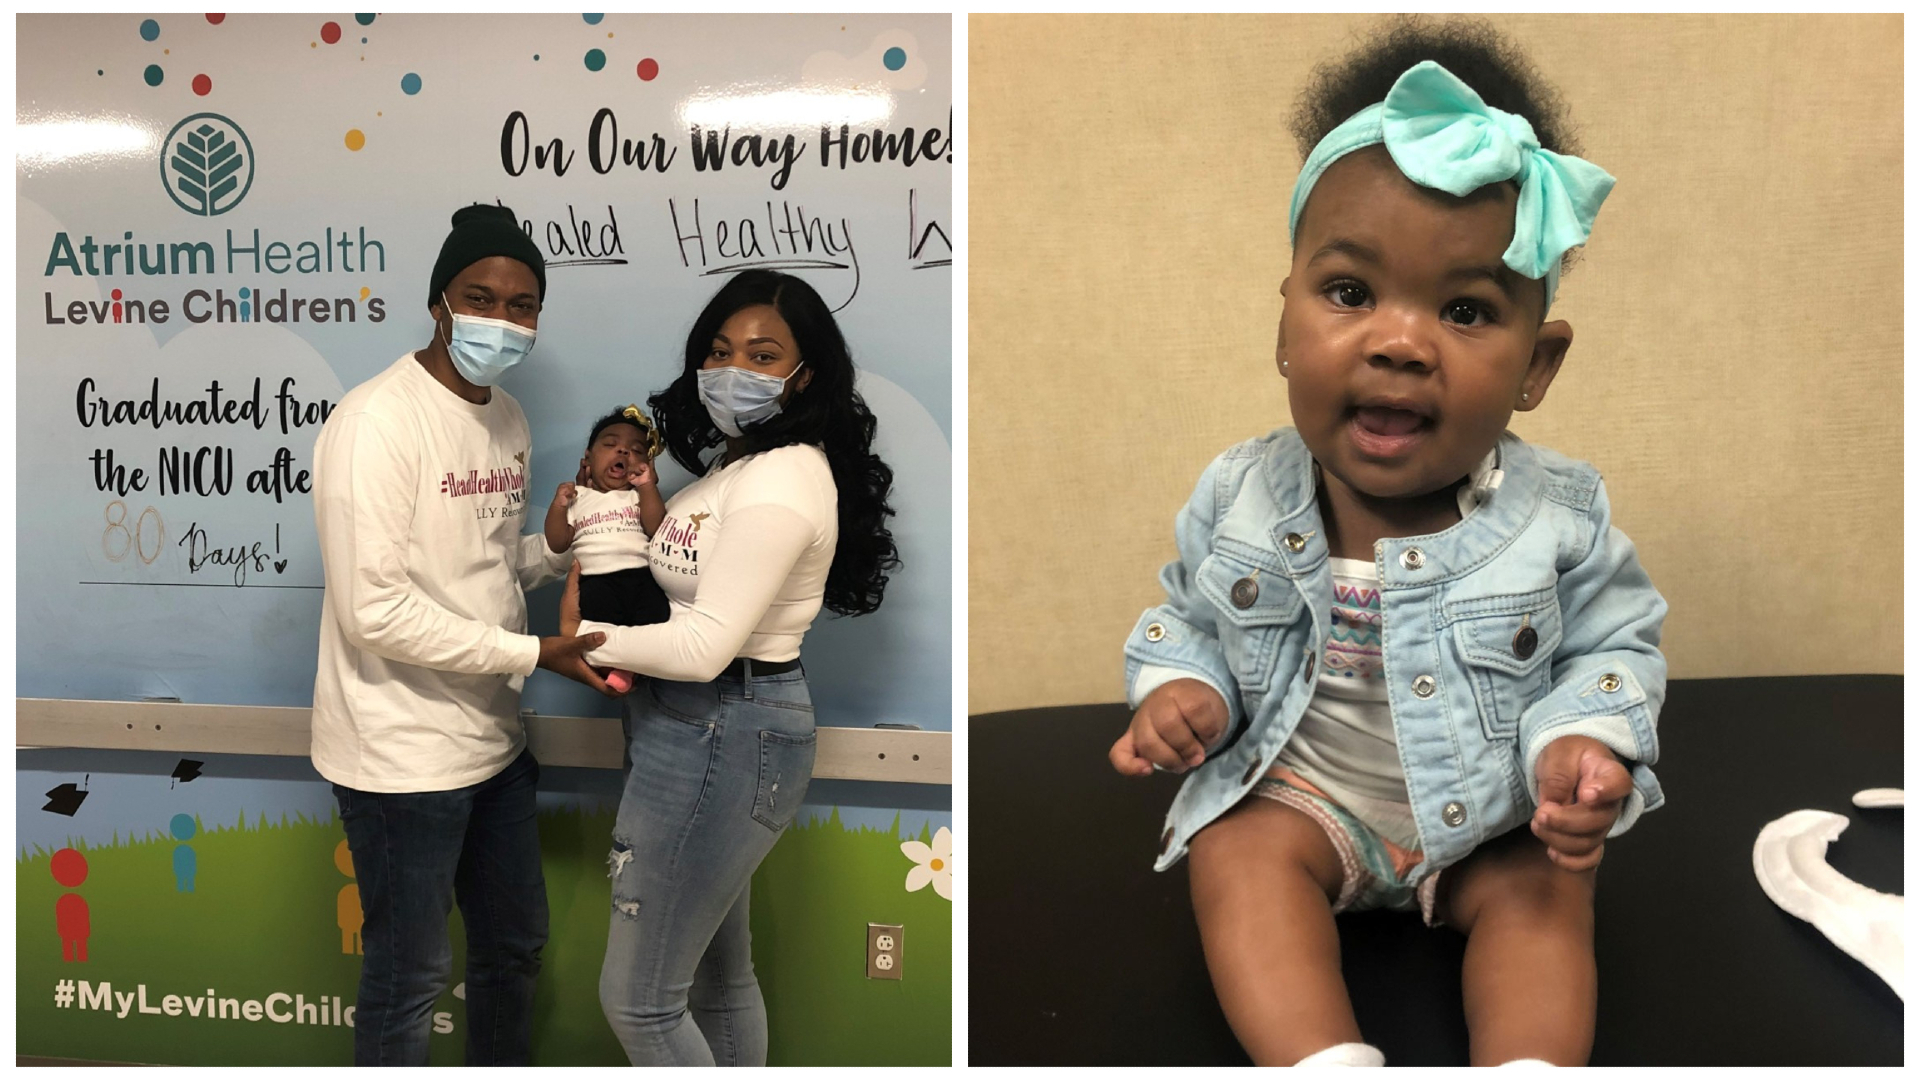 Anniston’s life started with seizures, strokes and surgeries. But today, she’s home and healthy – thanks to her brave parents, lots of prayers and award-winning neonatal care. 